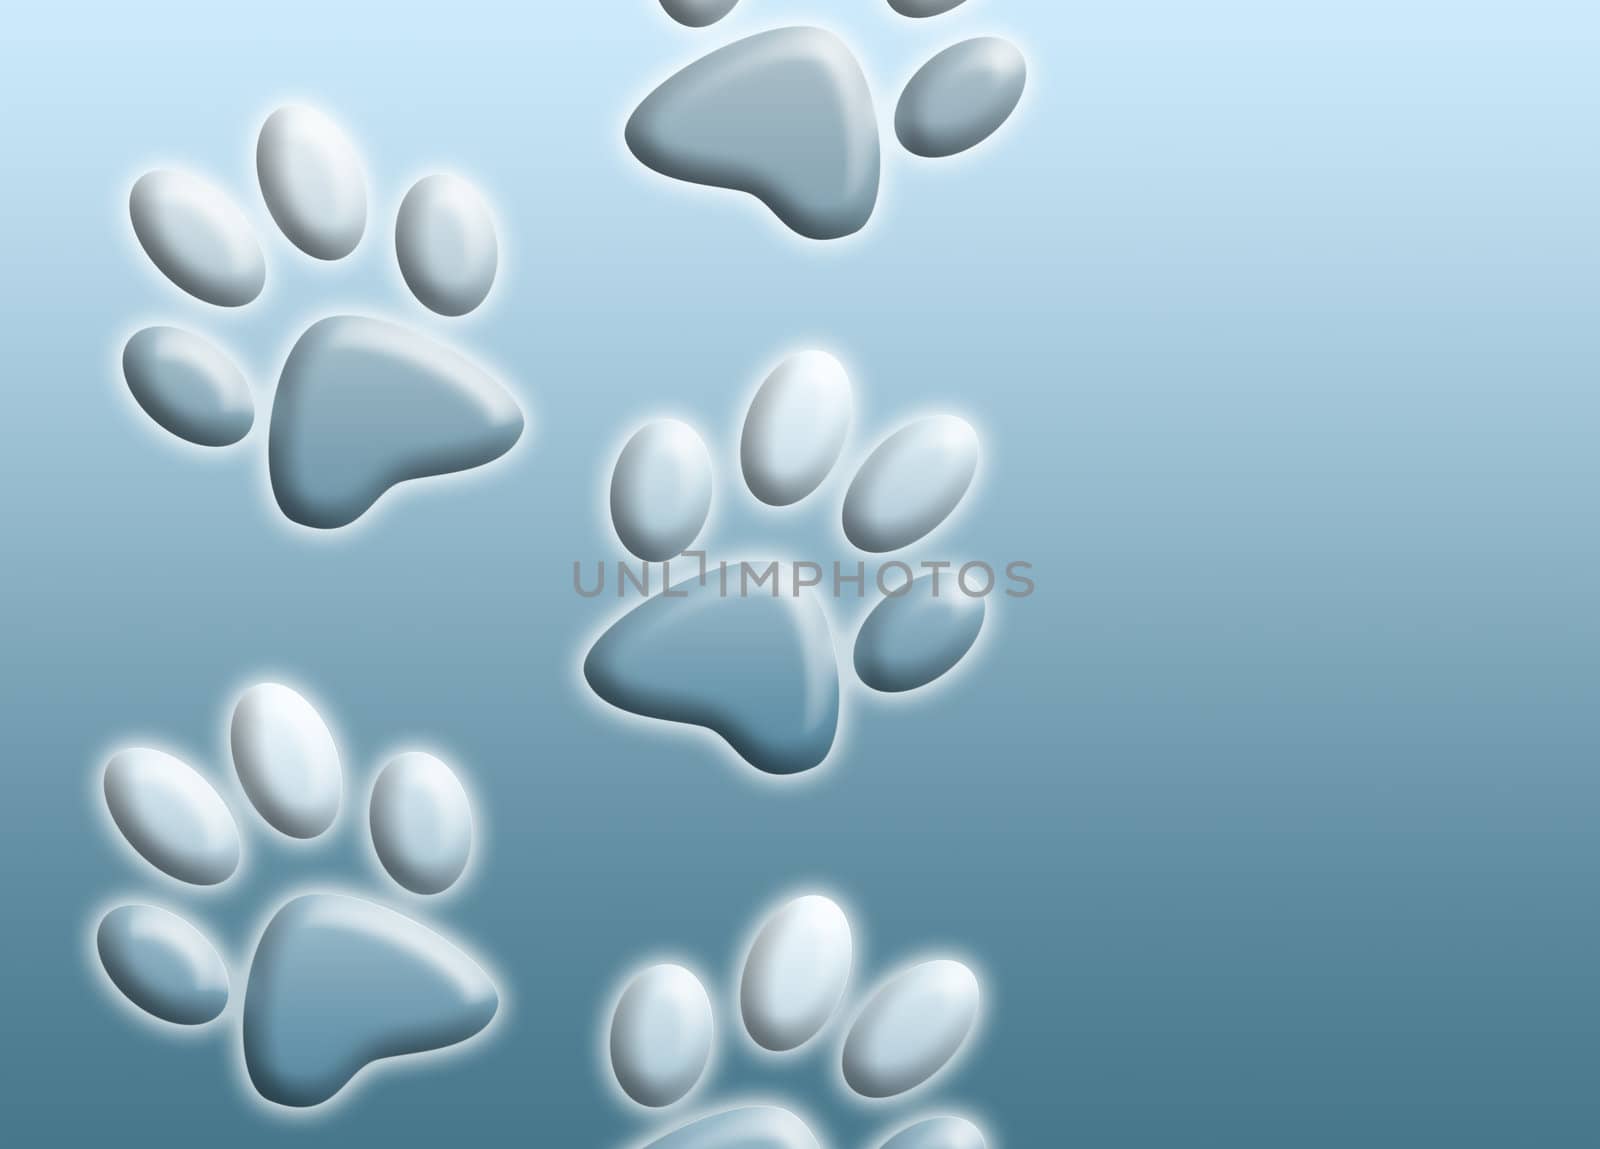 abstract background image of metallic paw prints going up the image